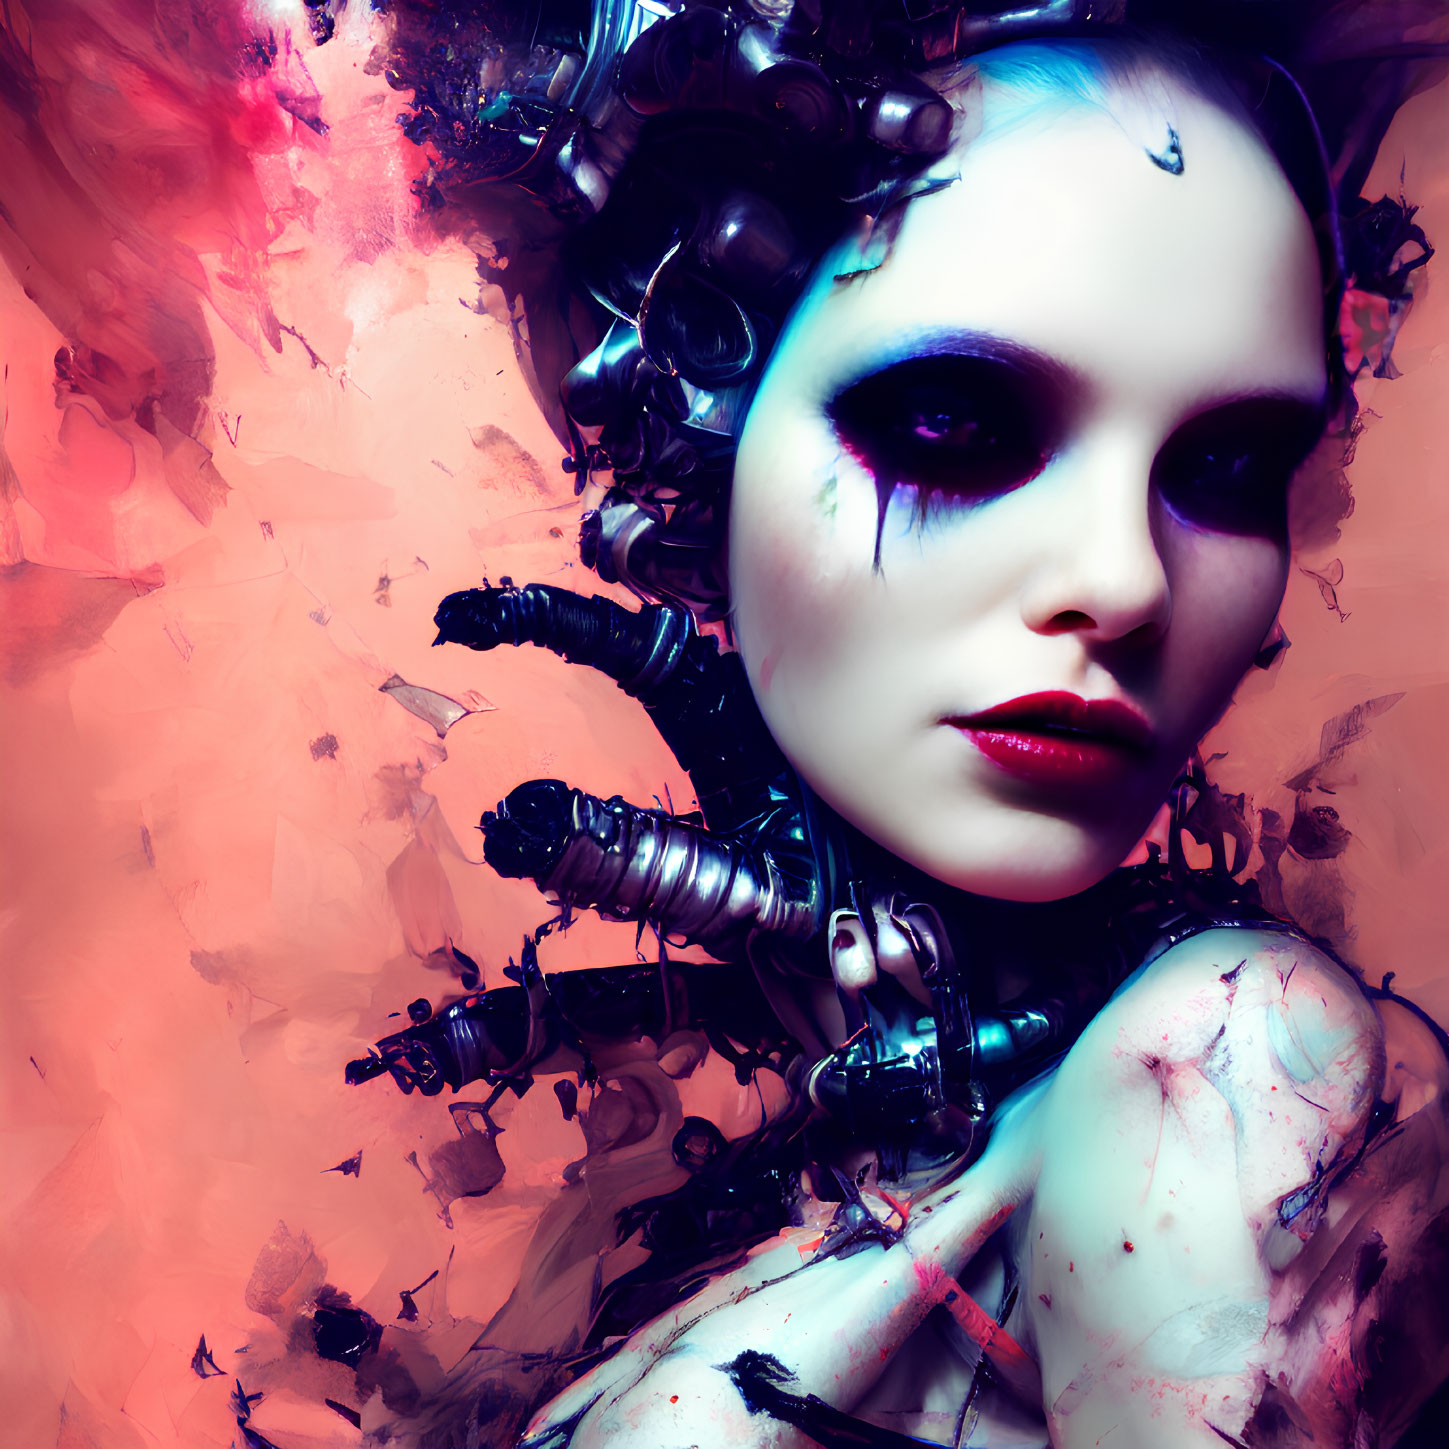 Cyberpunk-inspired portrait with mechanical parts and vivid color splashes